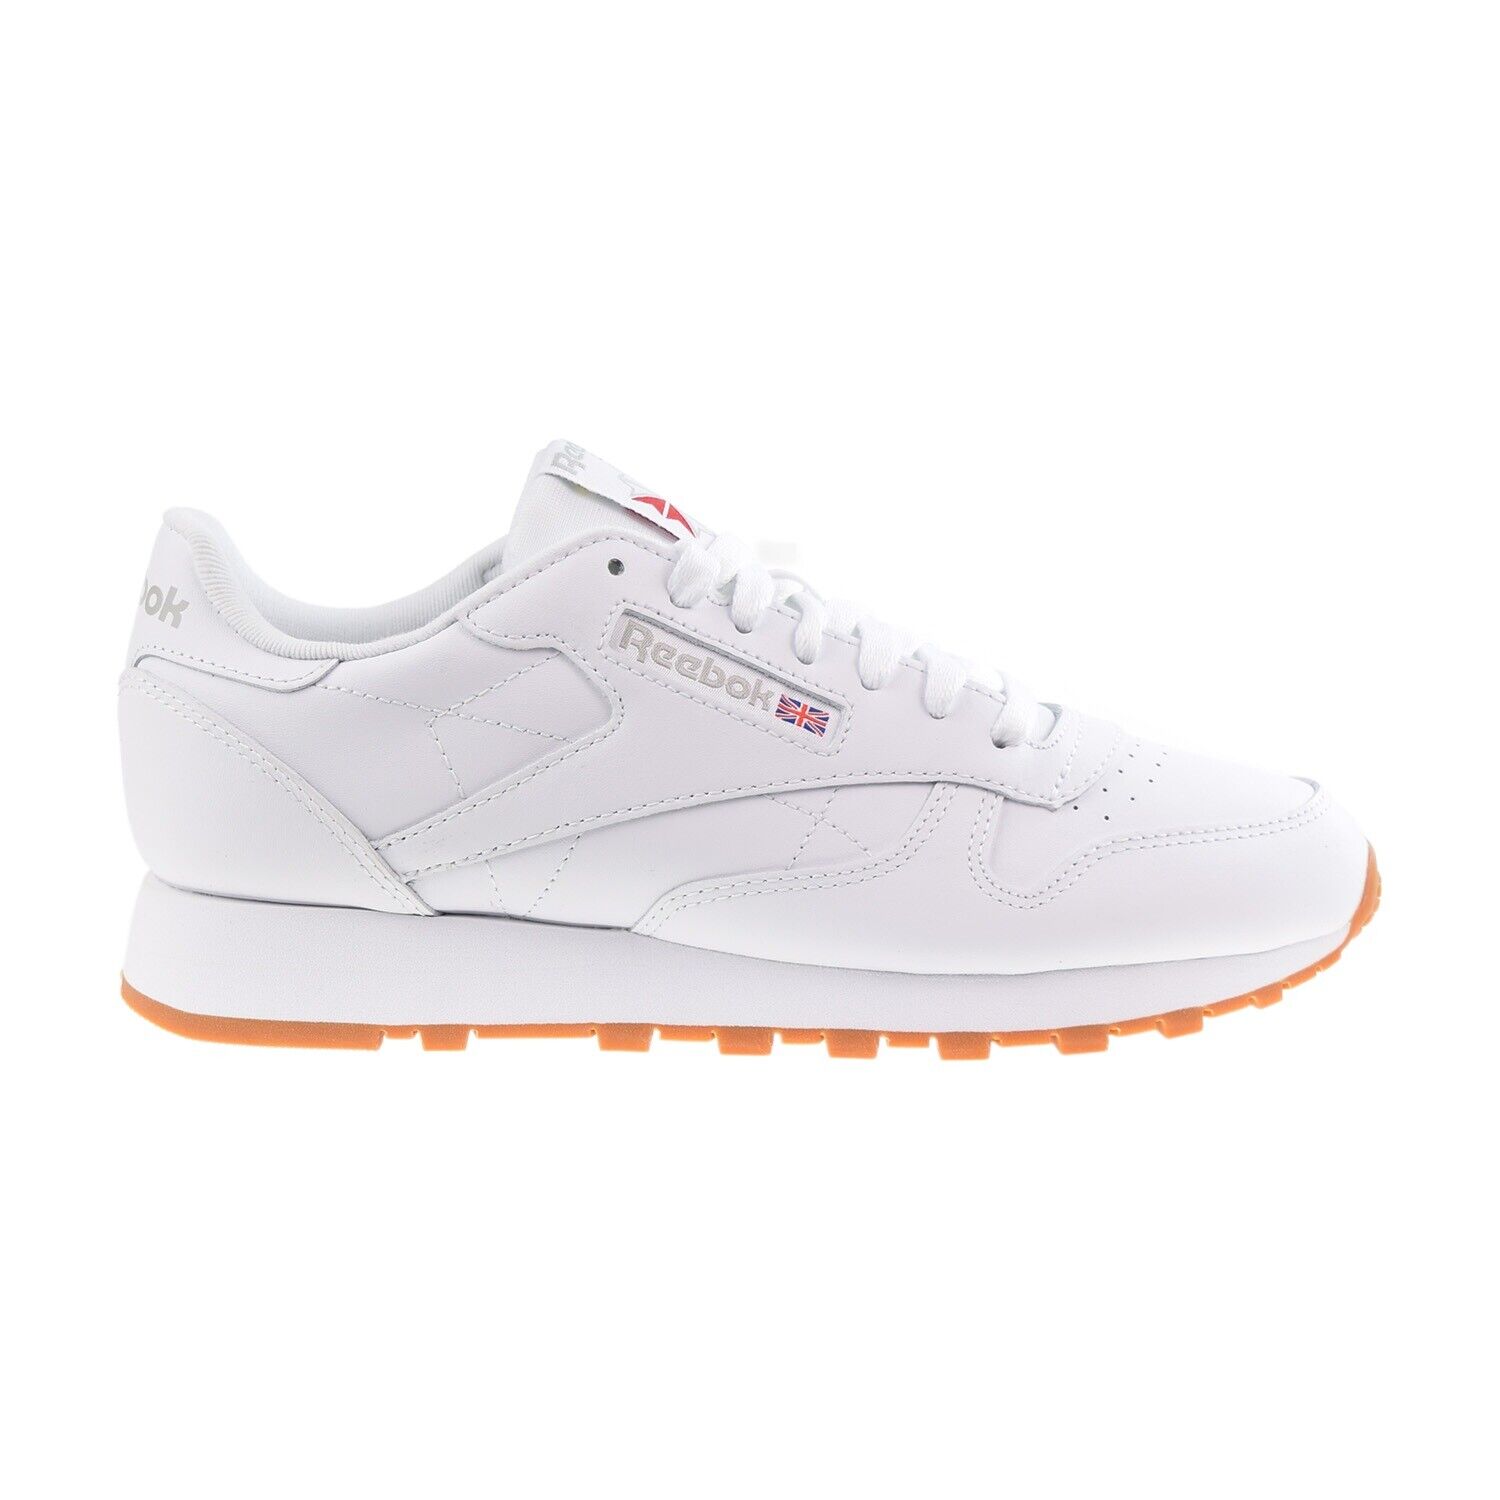 Reebok Classic Leather Men's Shoes Footwear White-Gum GY0952